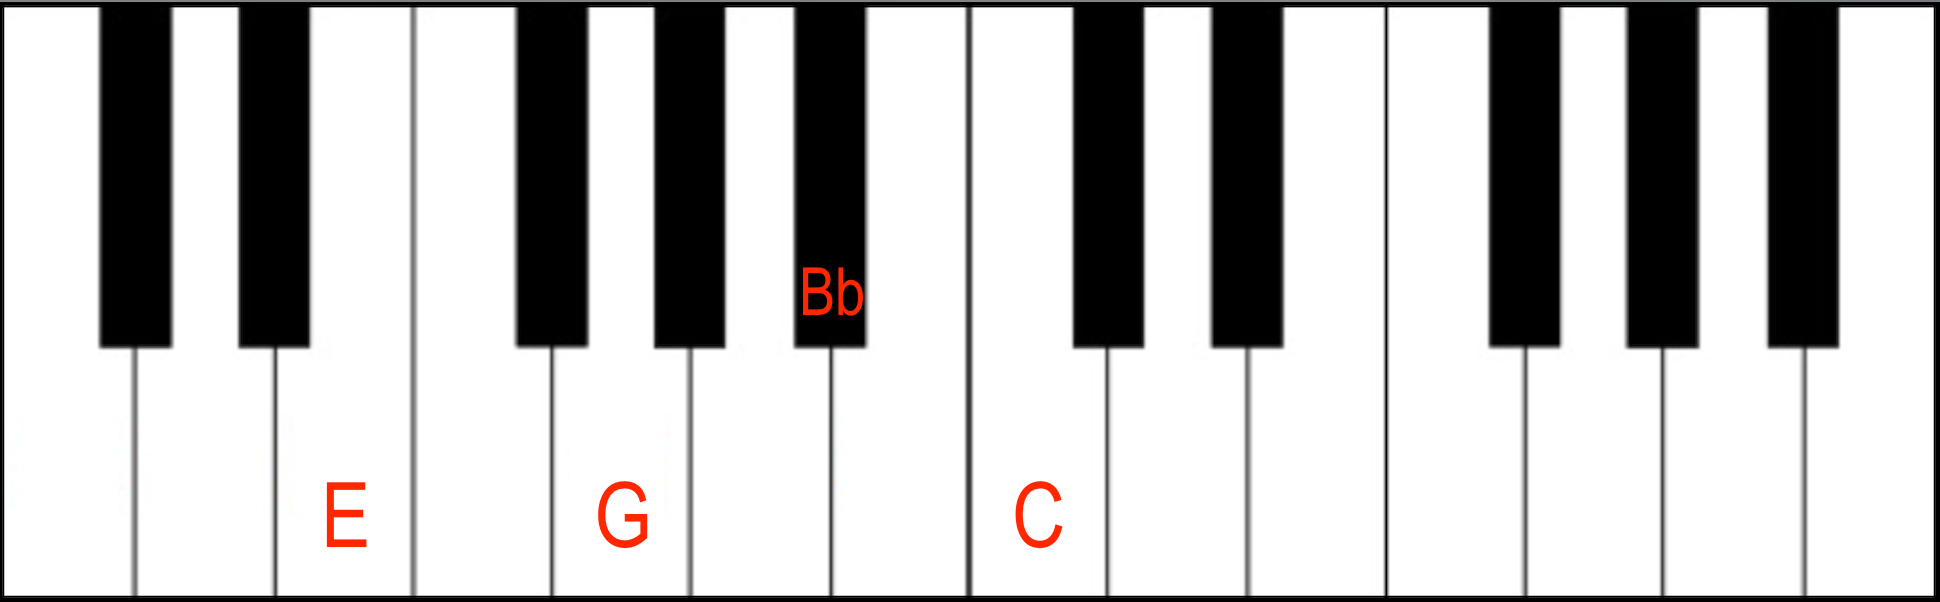 C7 Dominant 7th Chord in 1st Inversion